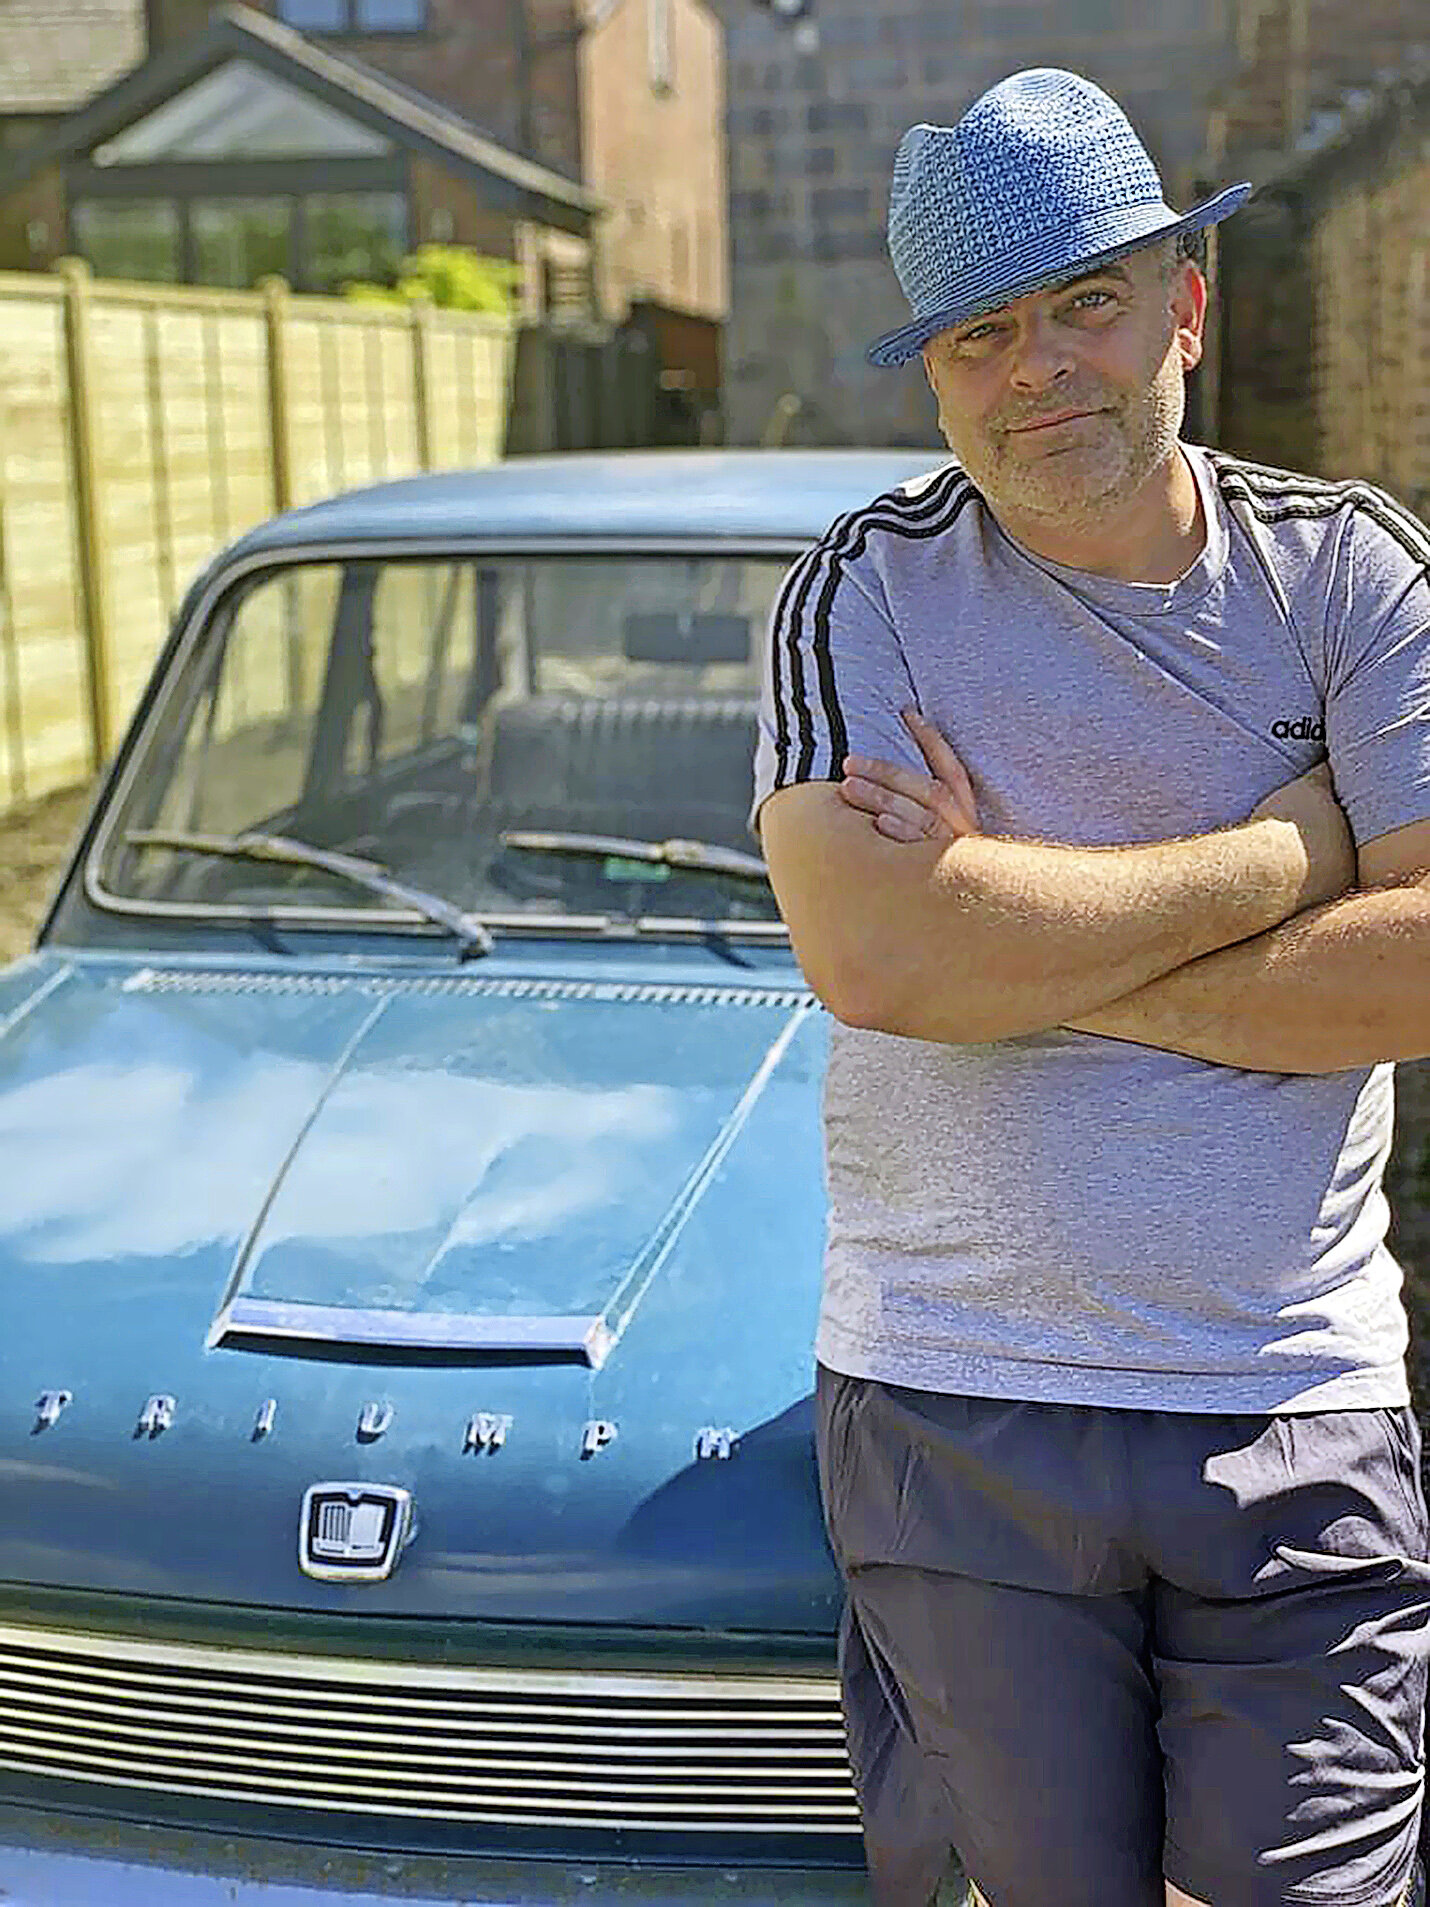 Coronation Street actor Simon Gregson, who donated his Triumph 1300 to a key-worker